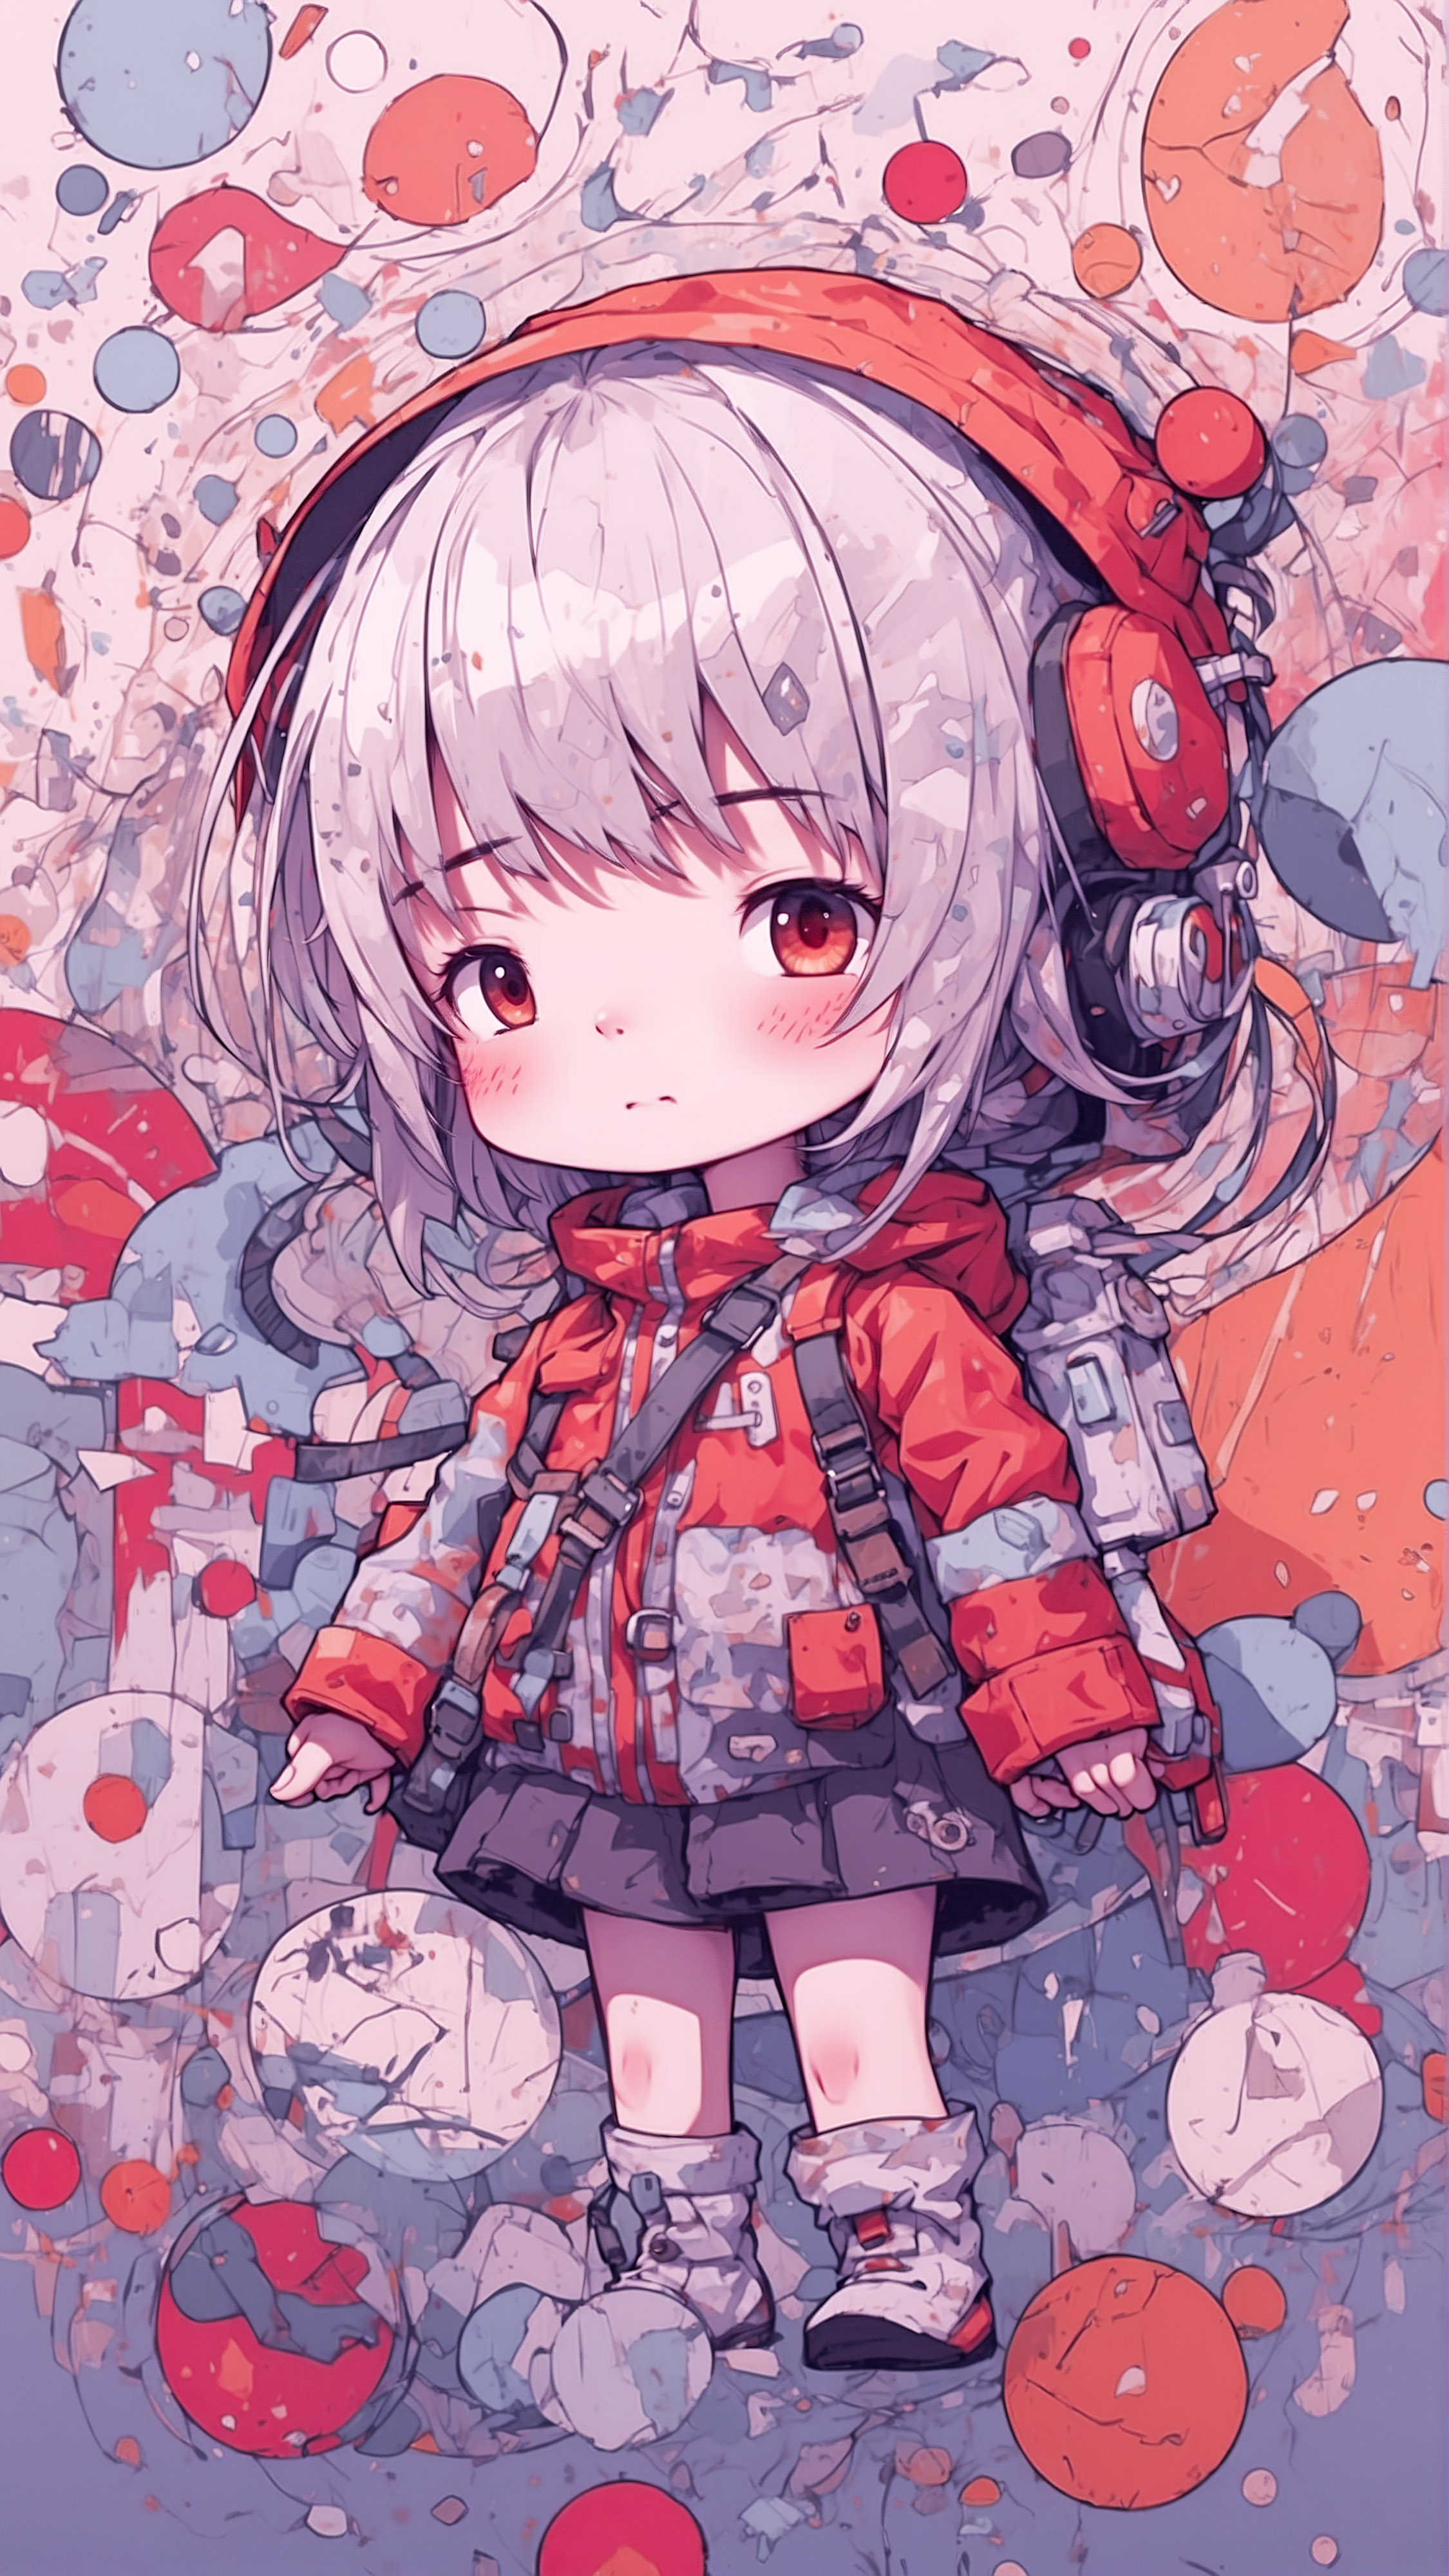 Experience the charm of a girly anime character surrounded by various abstract shapes and textures, through a delightful cute wallpaper for your iPhone.